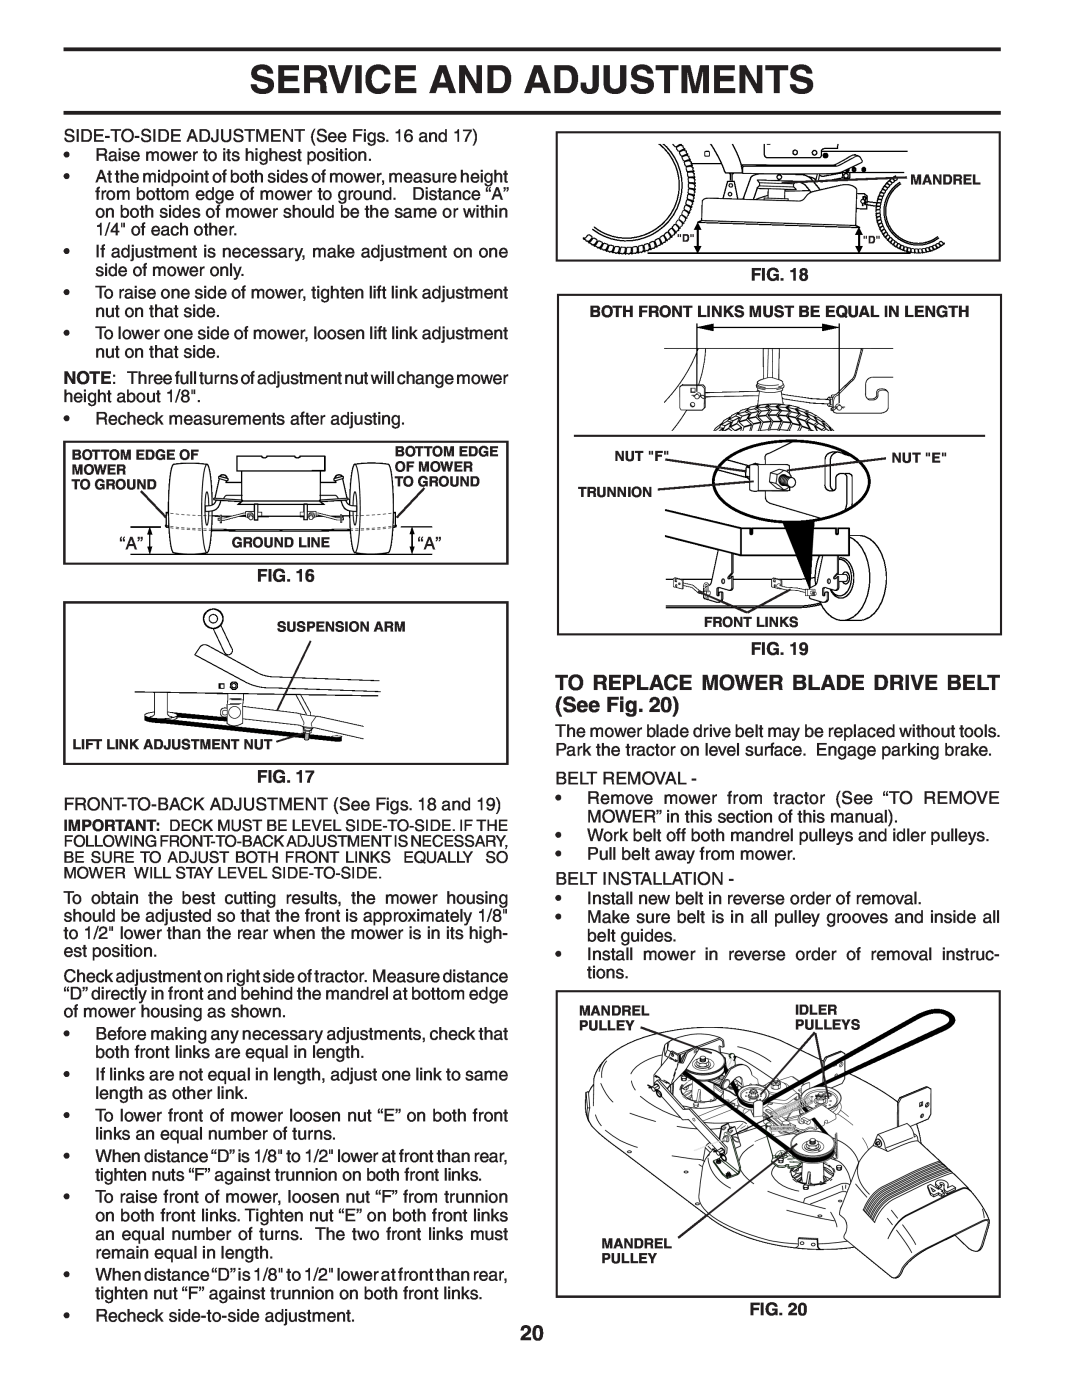 Poulan 96012004701, 402559 manual TO REPLACE MOWER BLADE DRIVE BELT See Fig, Service And Adjustments 